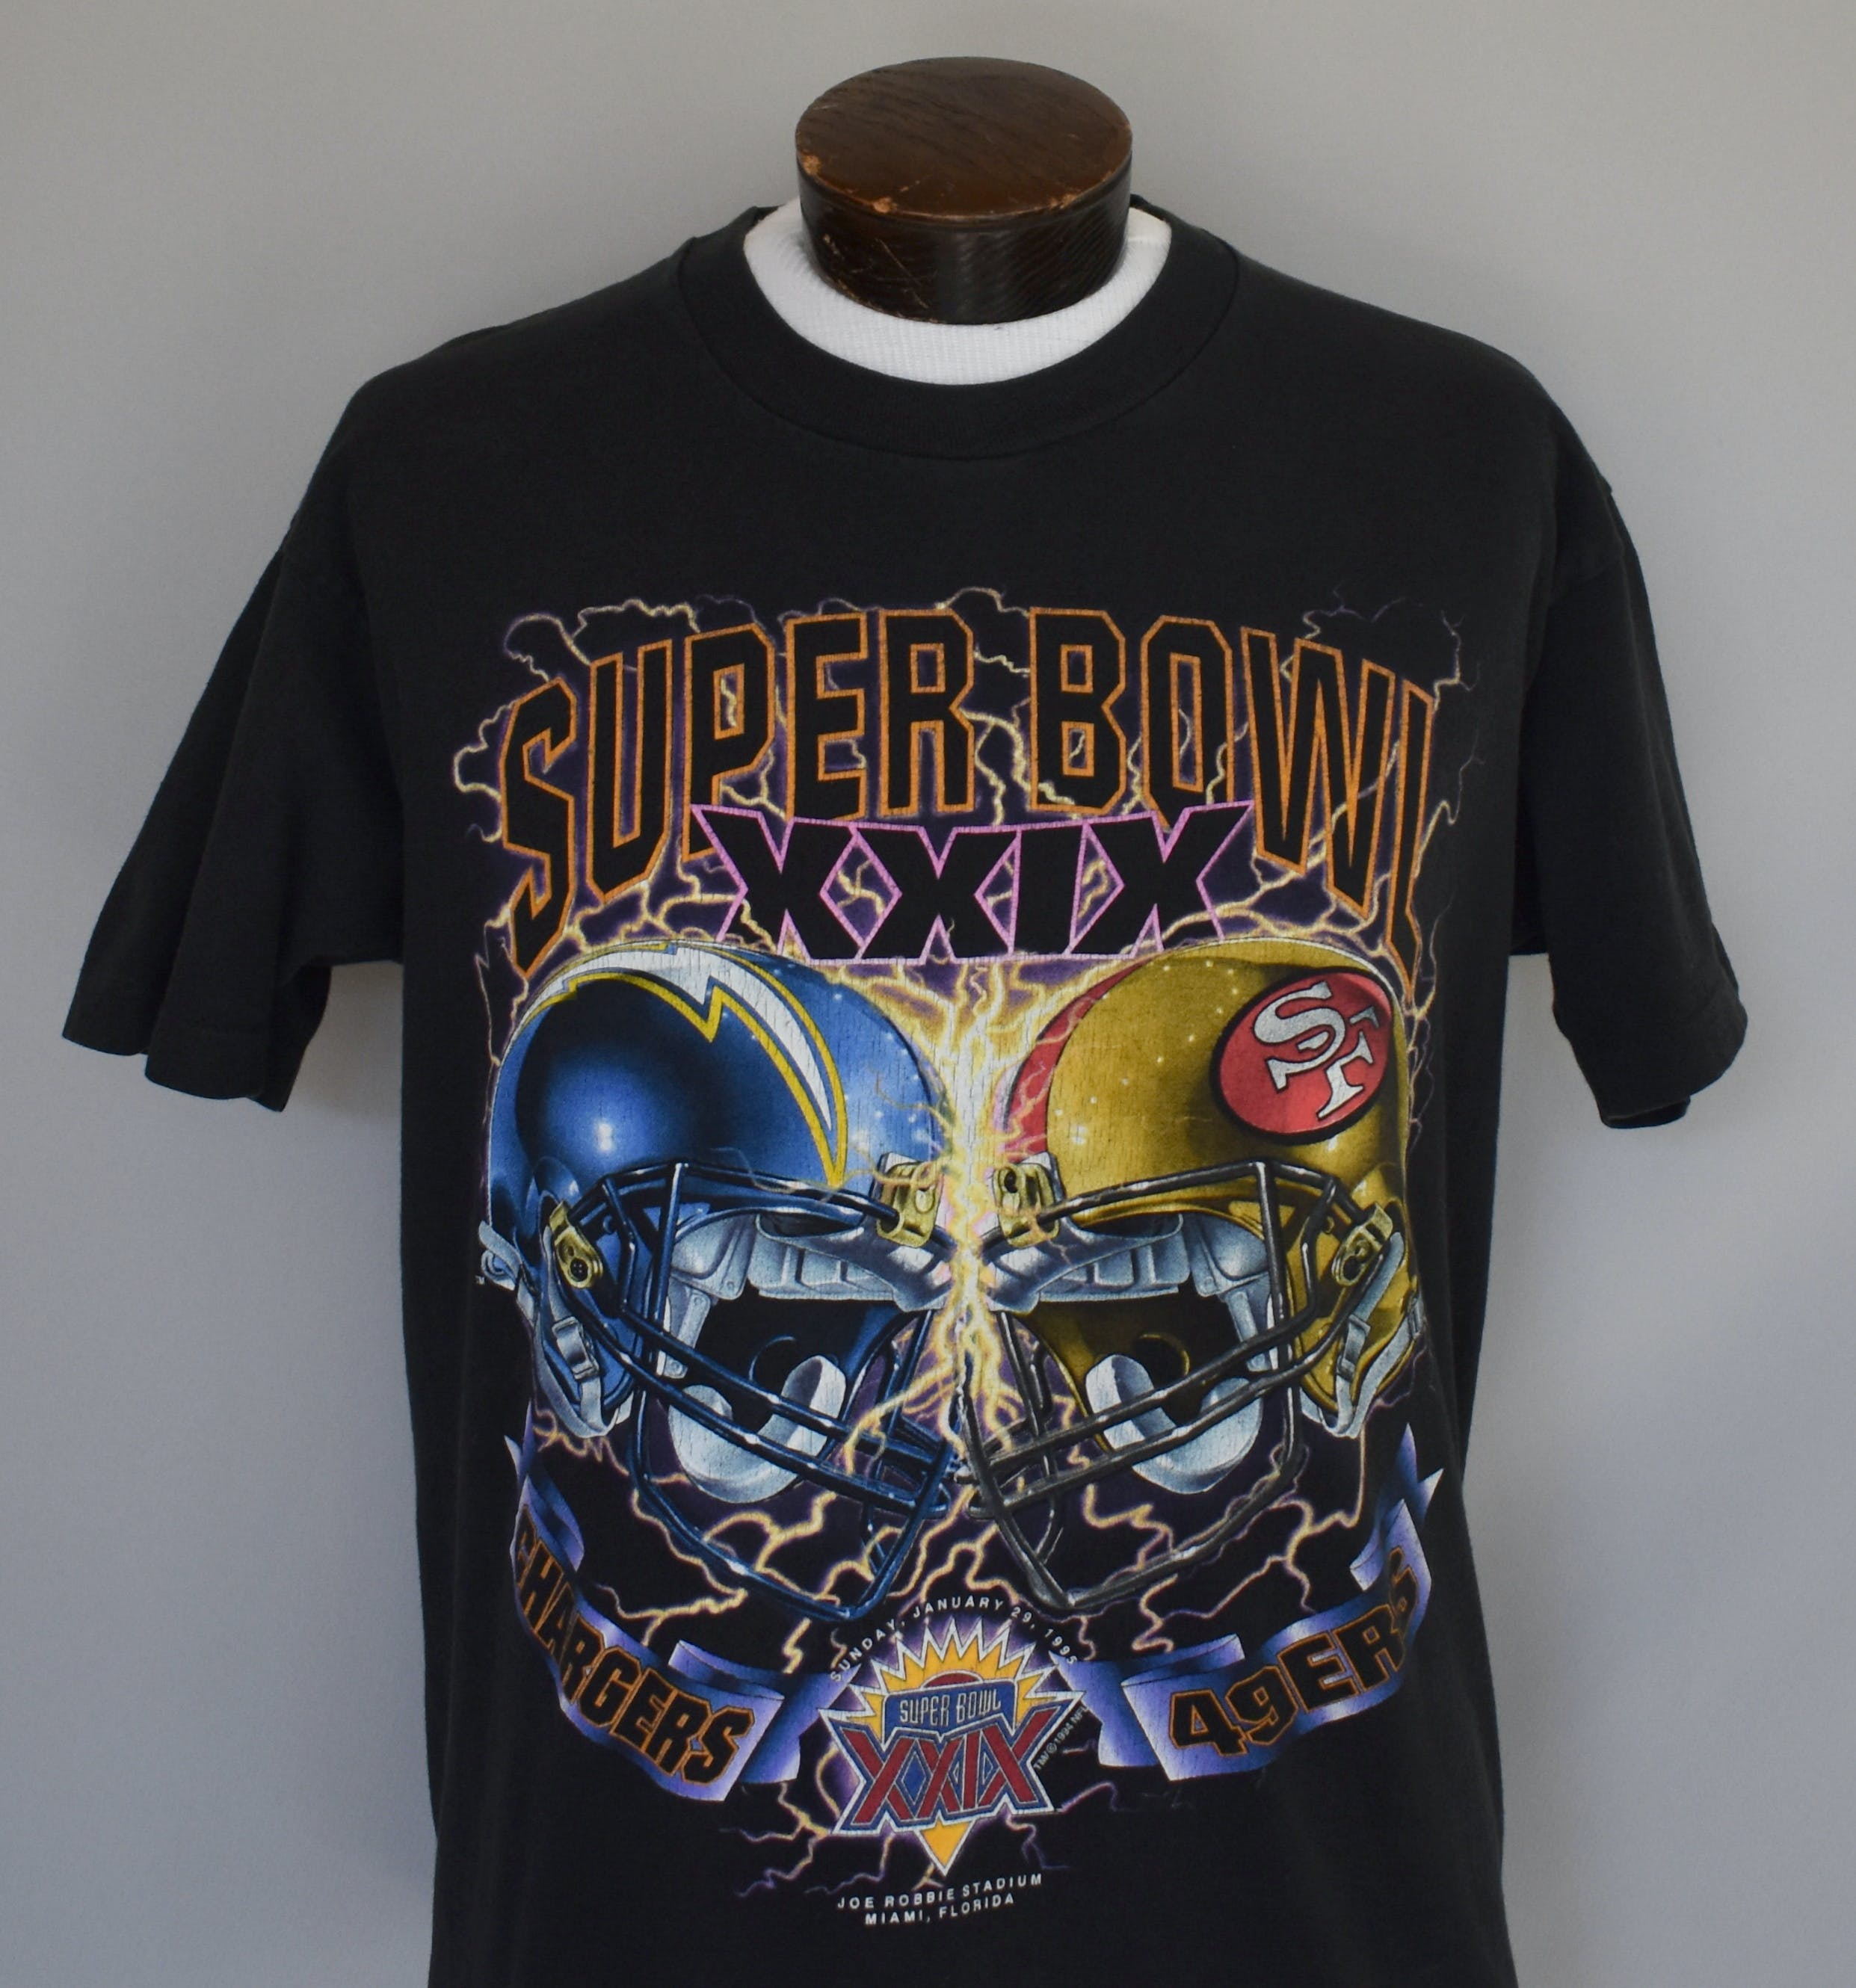 Vintage Super Bowl XXIX T-shirt NFL Football Chargers 49ers 1995 – For All  To Envy